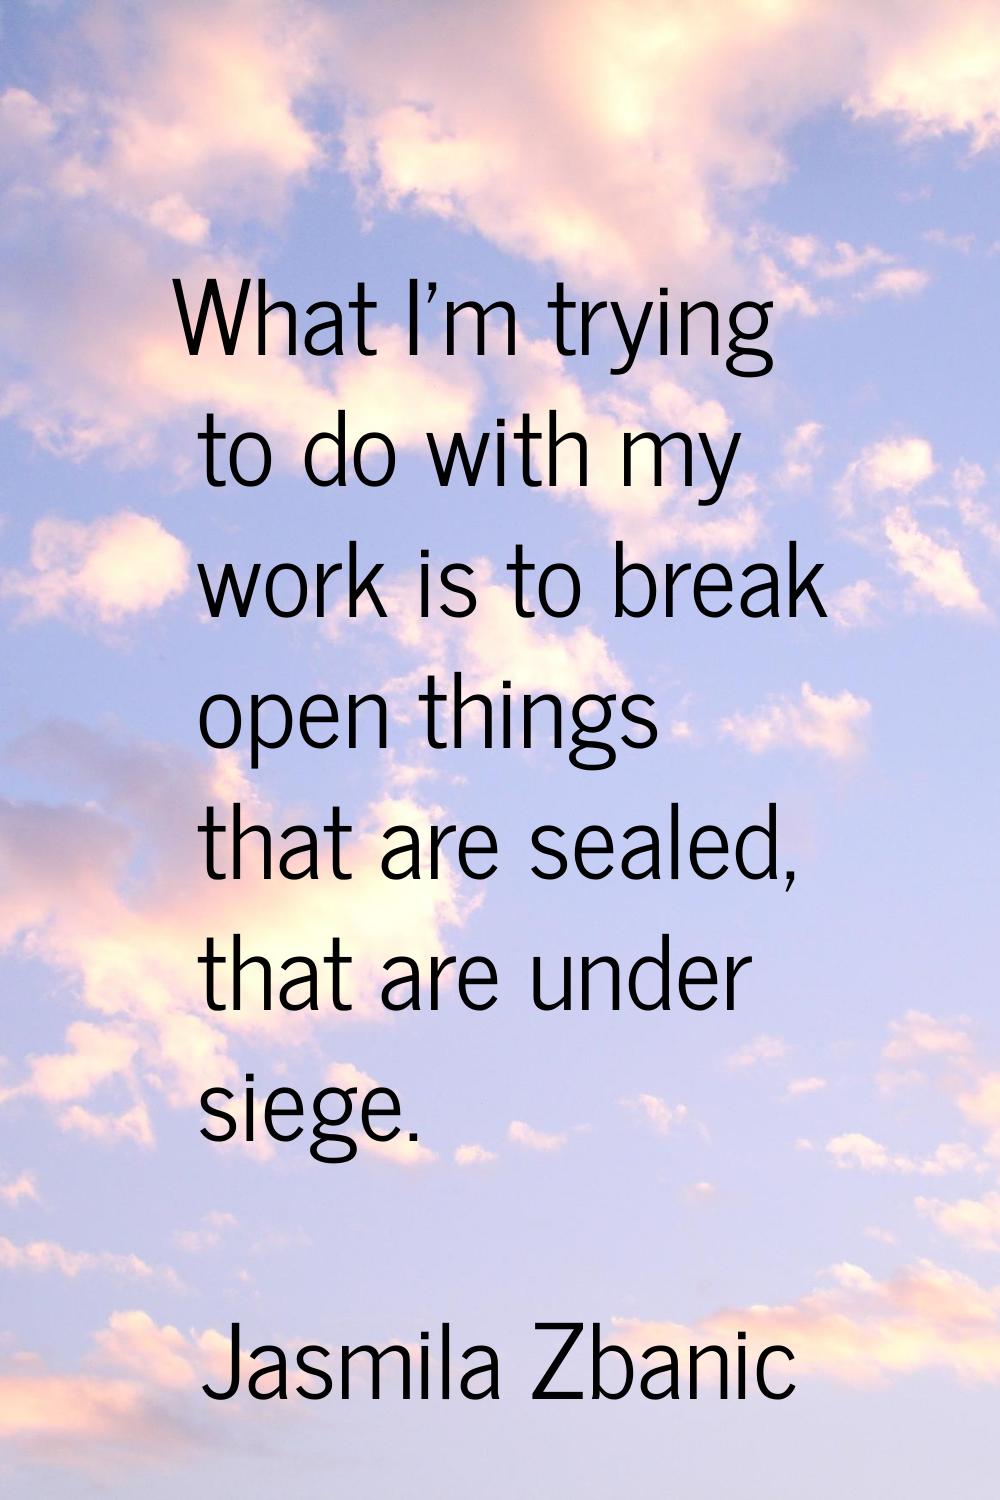 What I'm trying to do with my work is to break open things that are sealed, that are under siege.